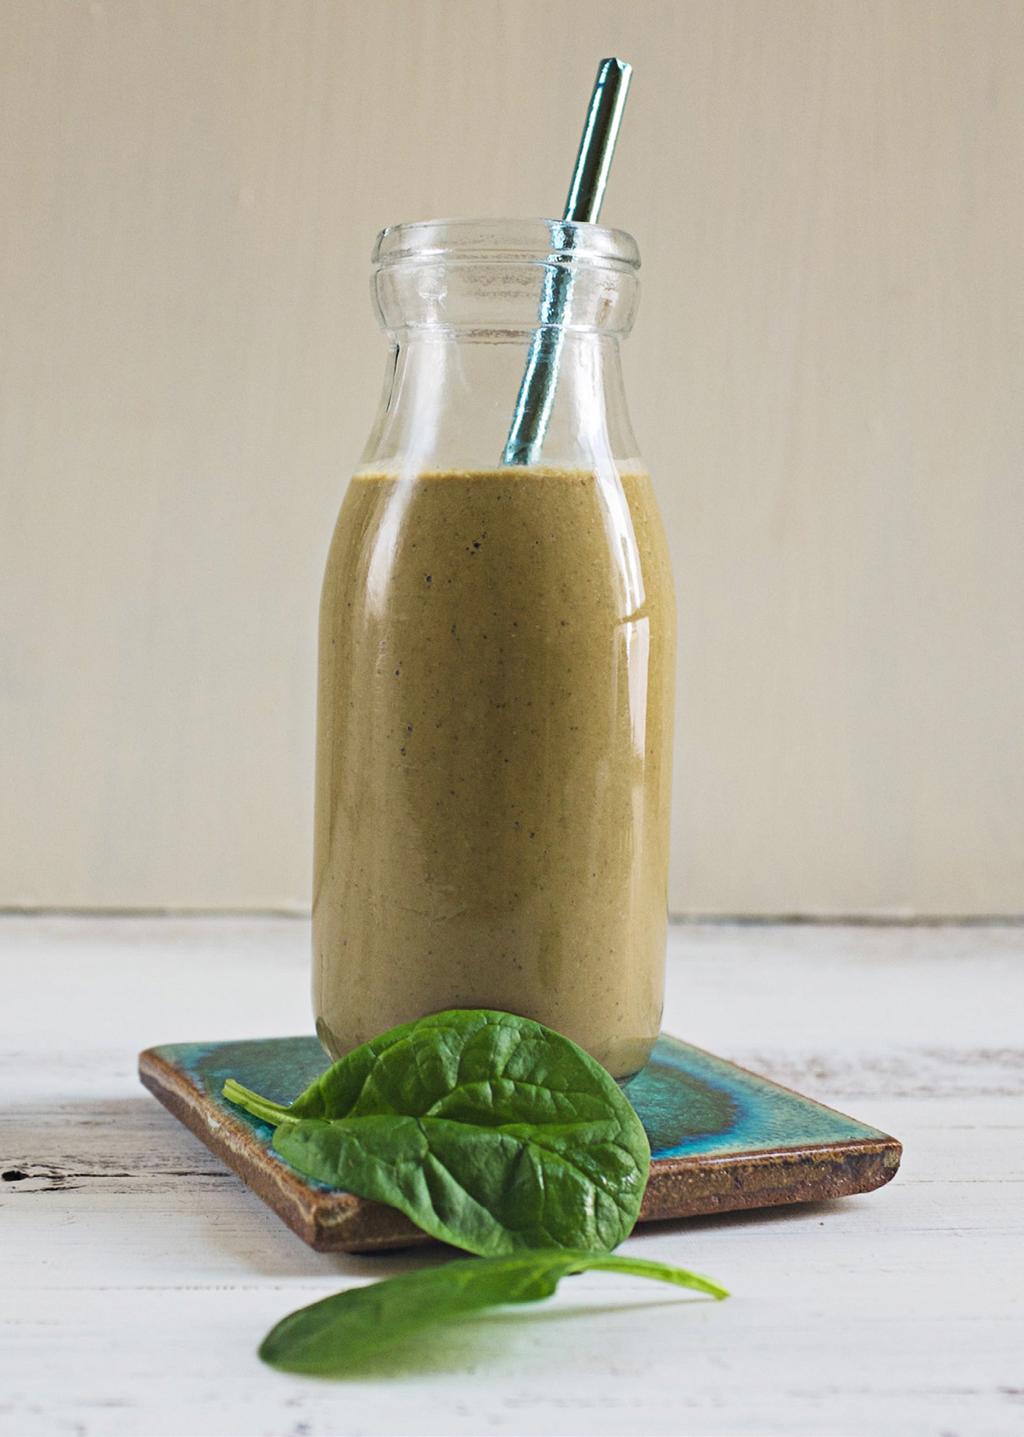 Chocolate Veg Smoothie 2 cups (480ml) cold water 1 serving PW1 Chocolate 1 banana ½ cup of frozen spinach ½ an orange